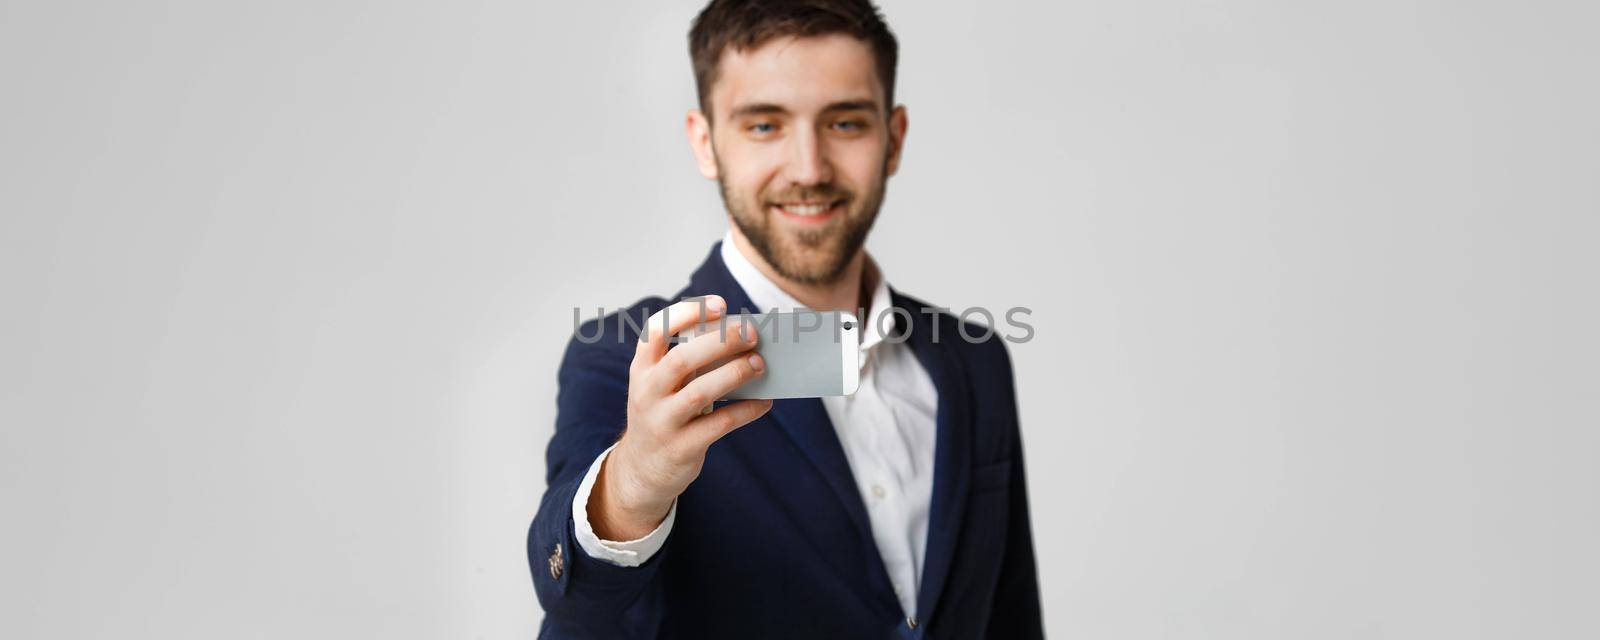 Business Concept - Handsome Business man take a selfie of himself with smartphone. White Background.